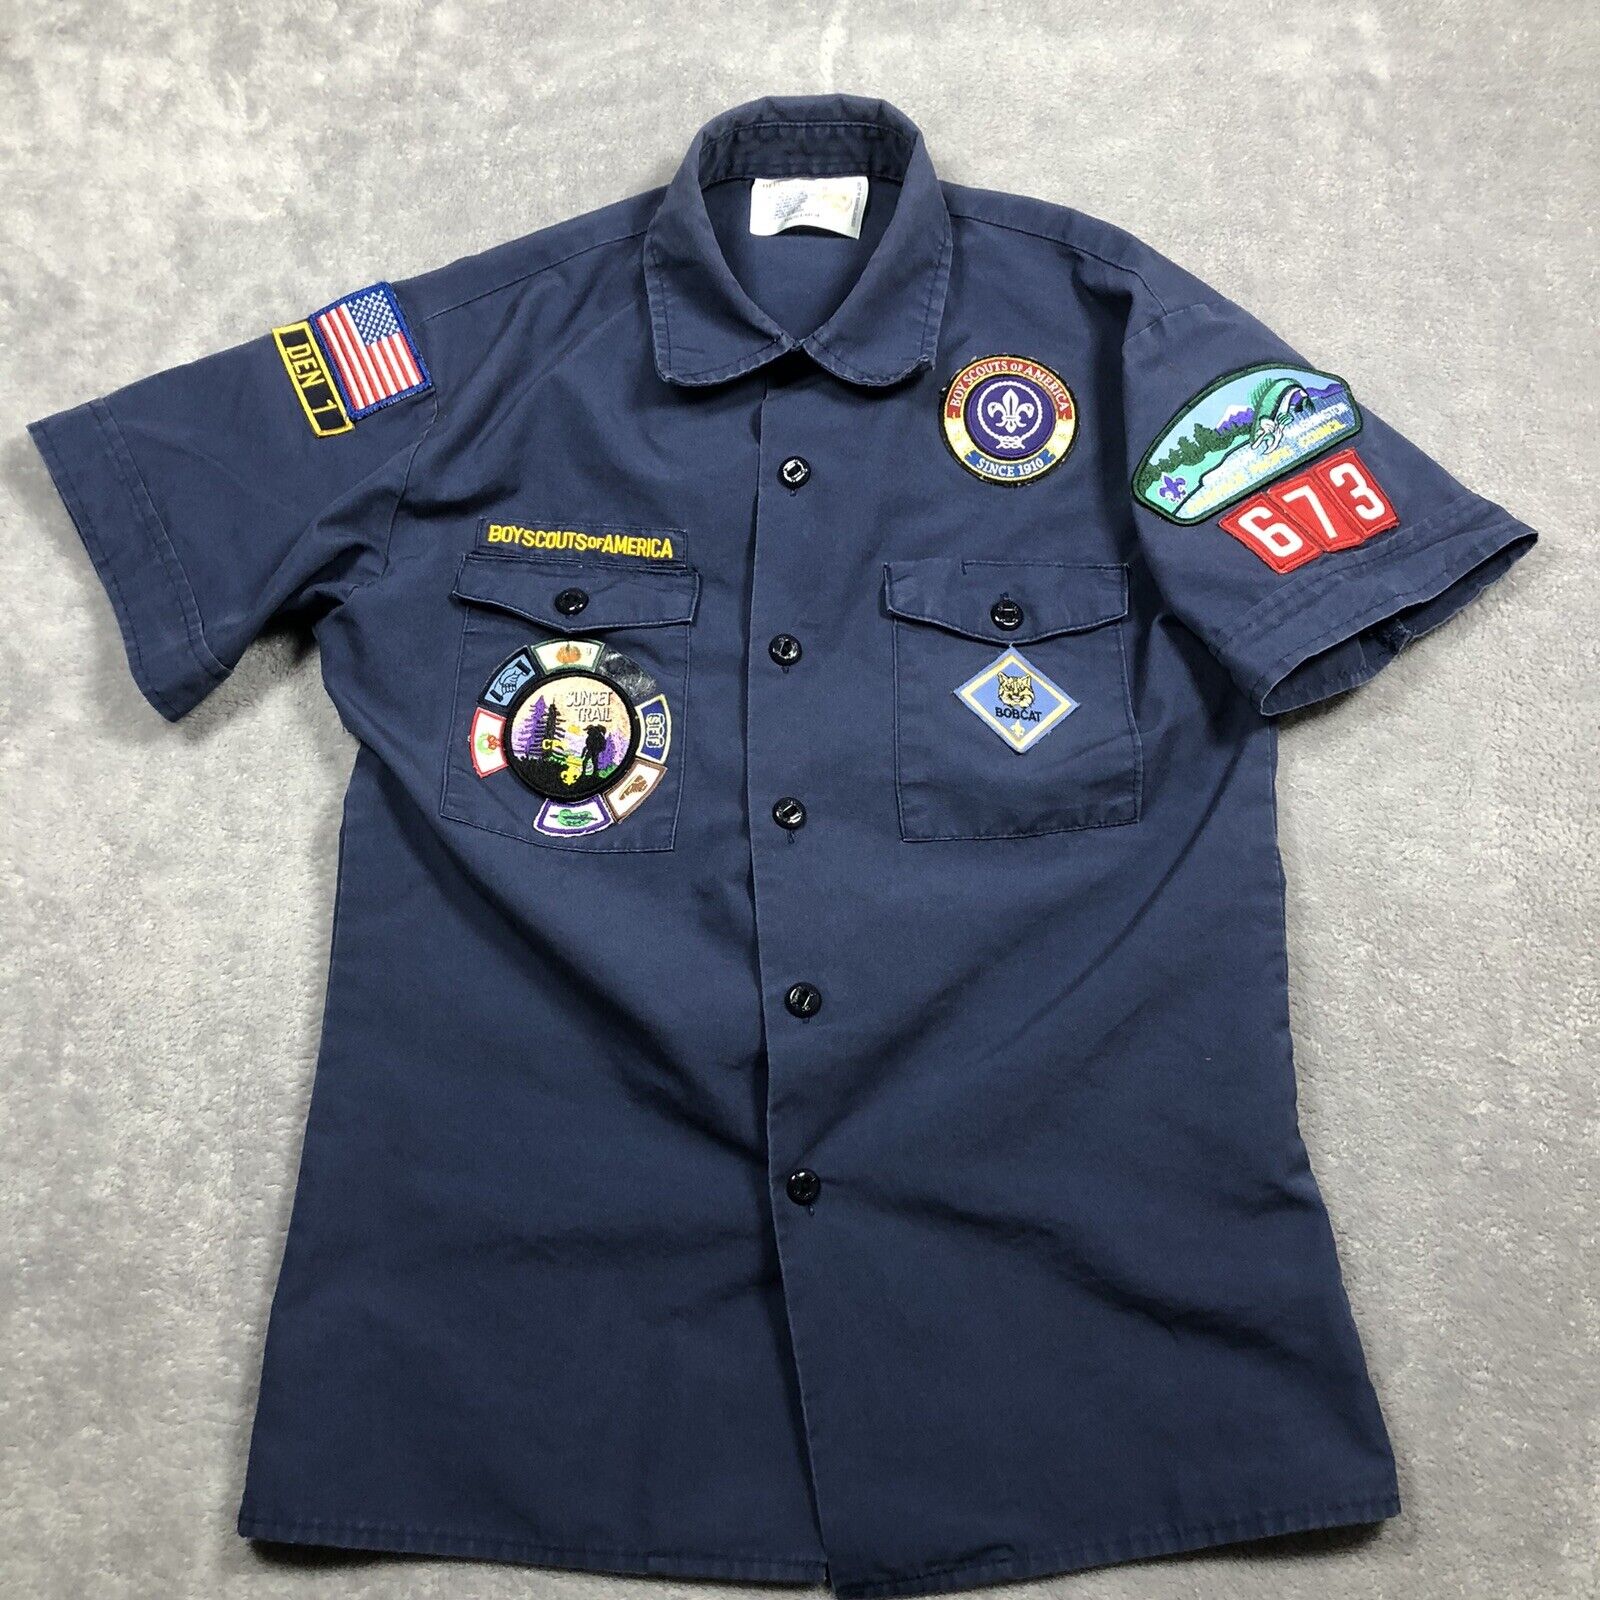 Boy Scouts Of America Shirt Boys Youth Large Blue BSA Uniform Patches Outdoor